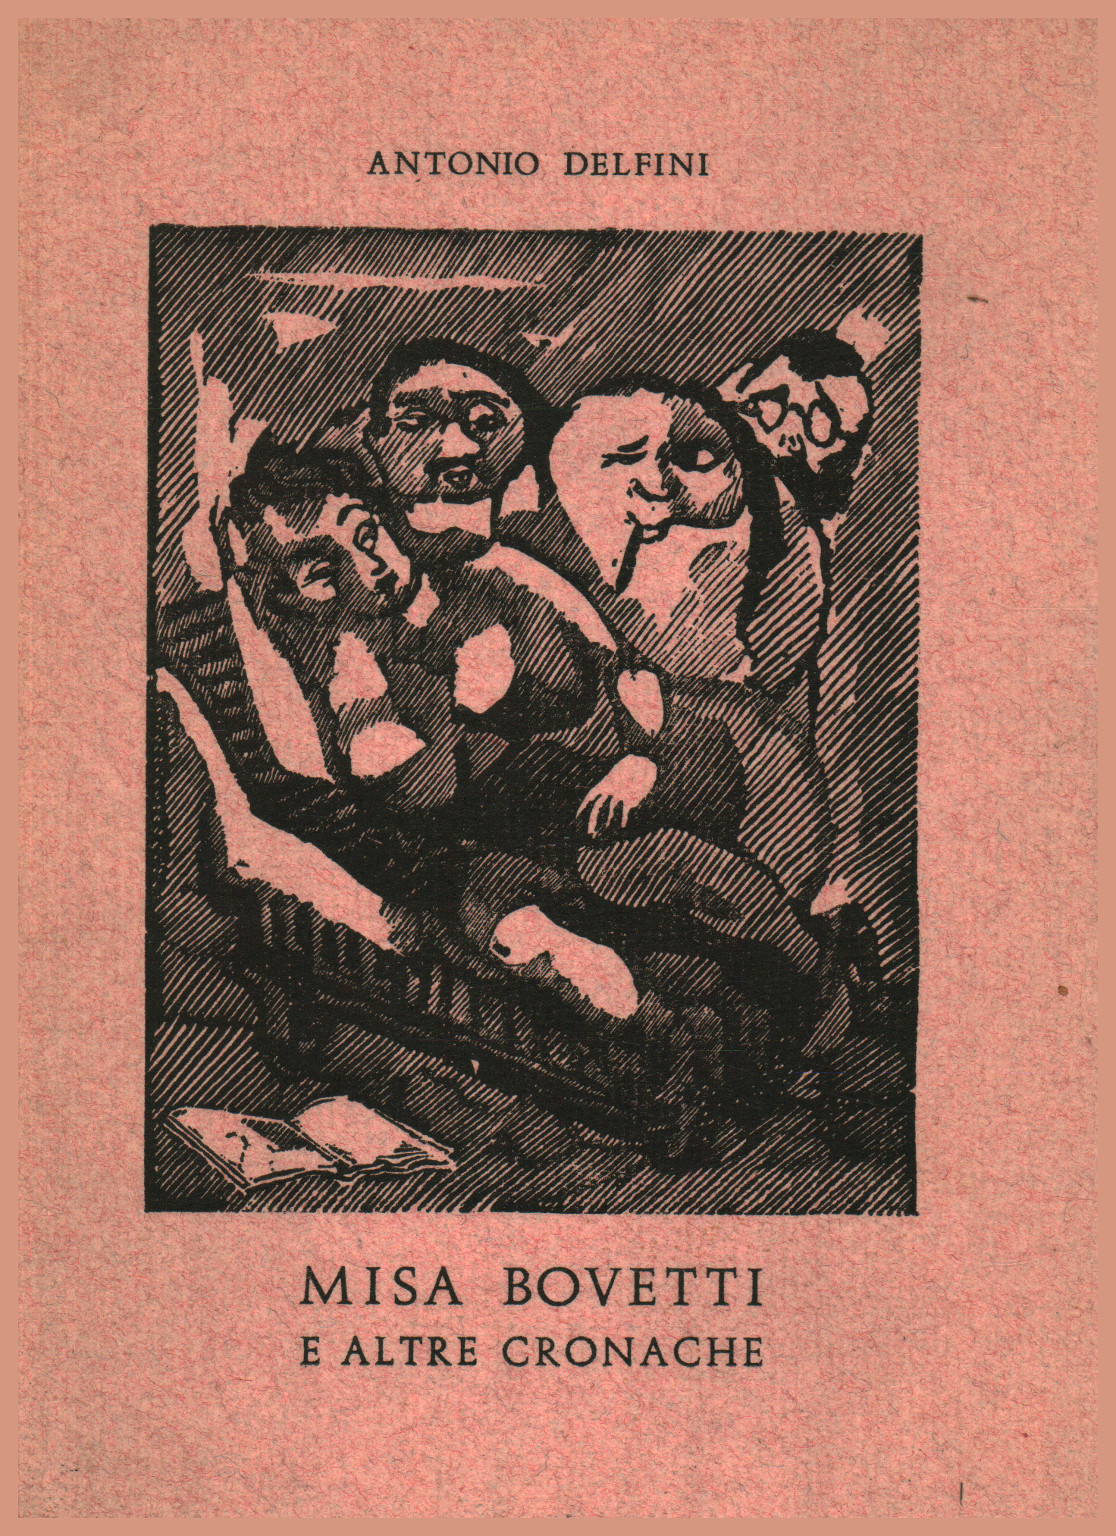 Misa Bovetti and other chronicles, s.a.